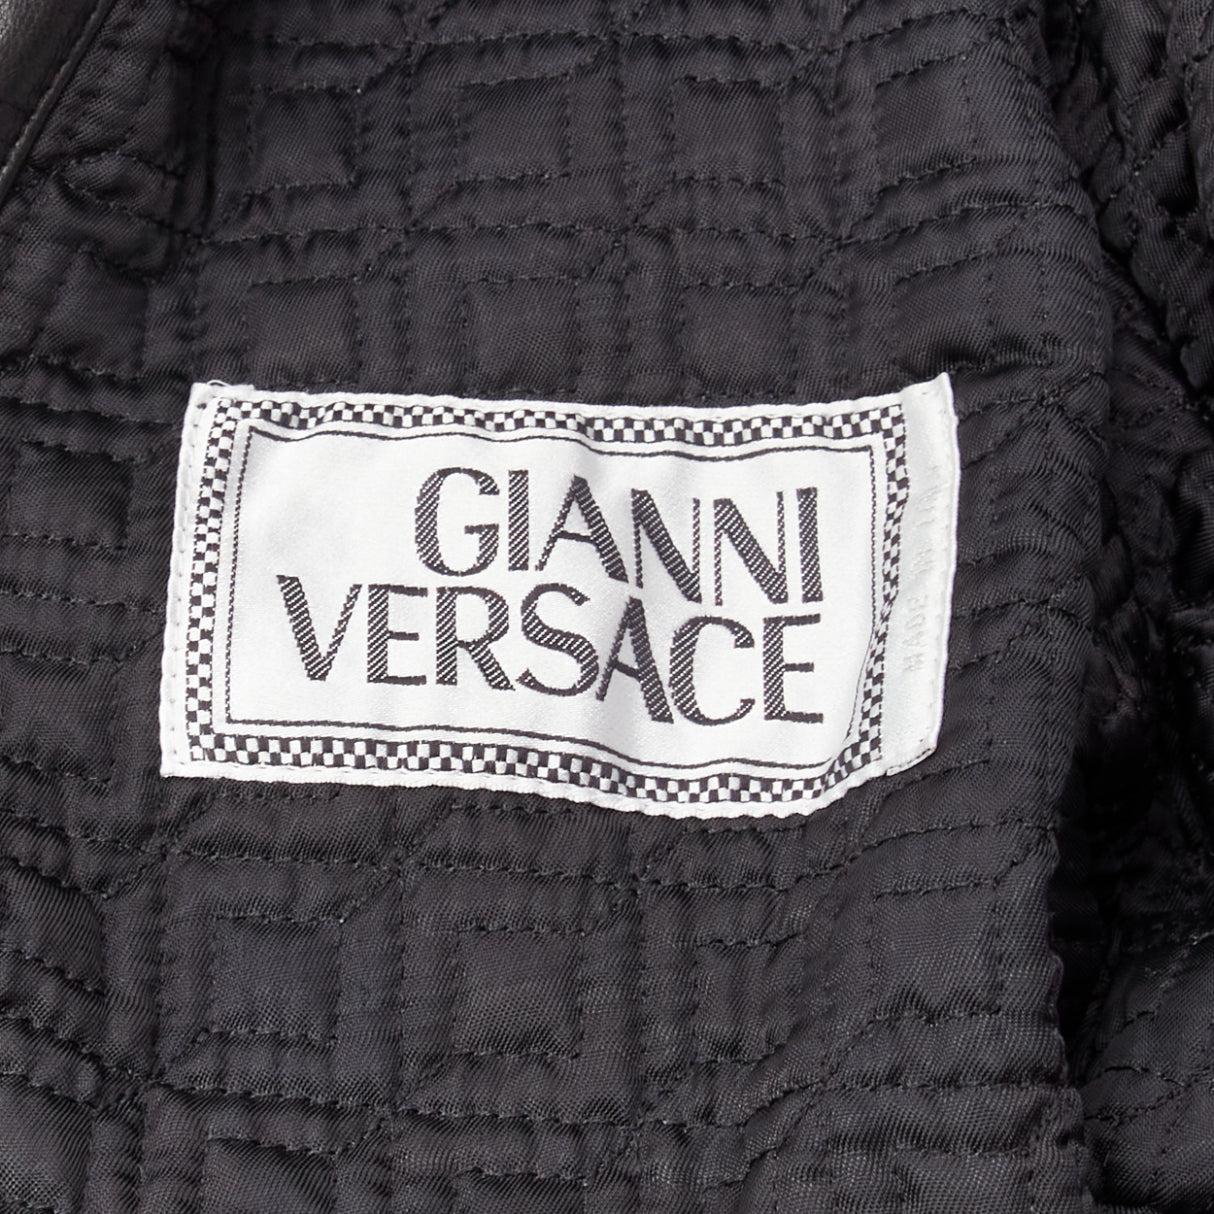 GIANNI VERSACE 1992 S&M black leather gold bondage buckle bomber IT38 XS For Sale 4